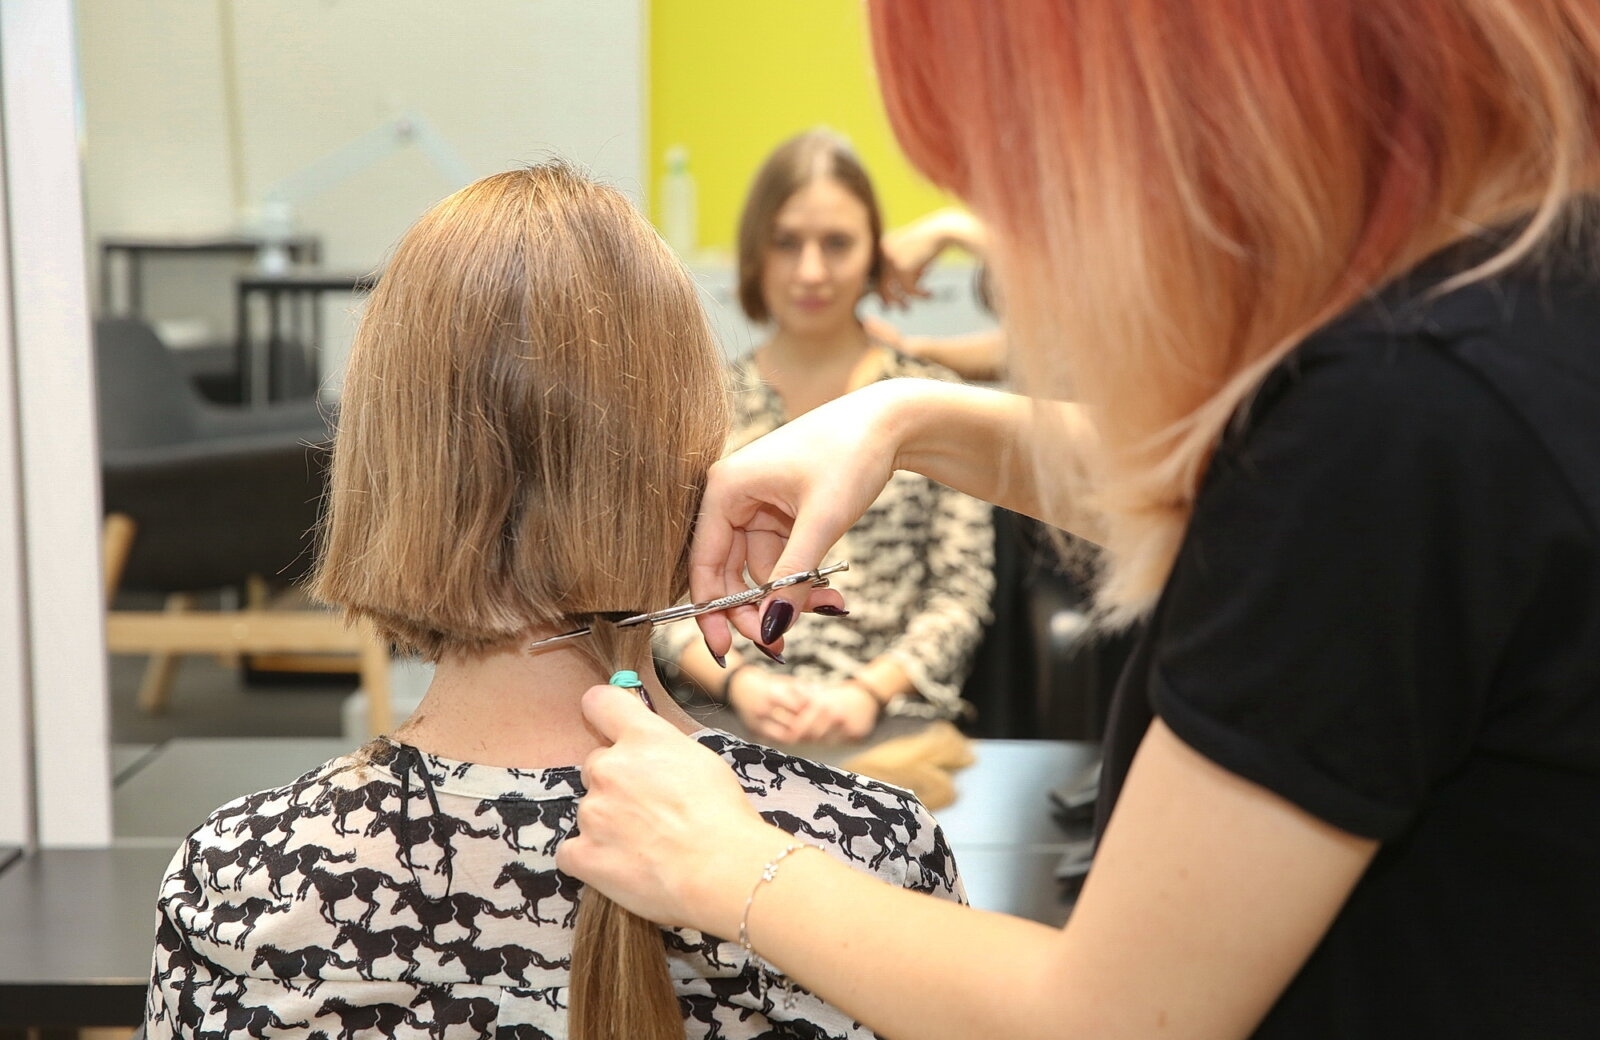 Hair For Share Urges People To Cut Hair, Makes Wigs For with regard to Cutting Hair Because Of Cancer